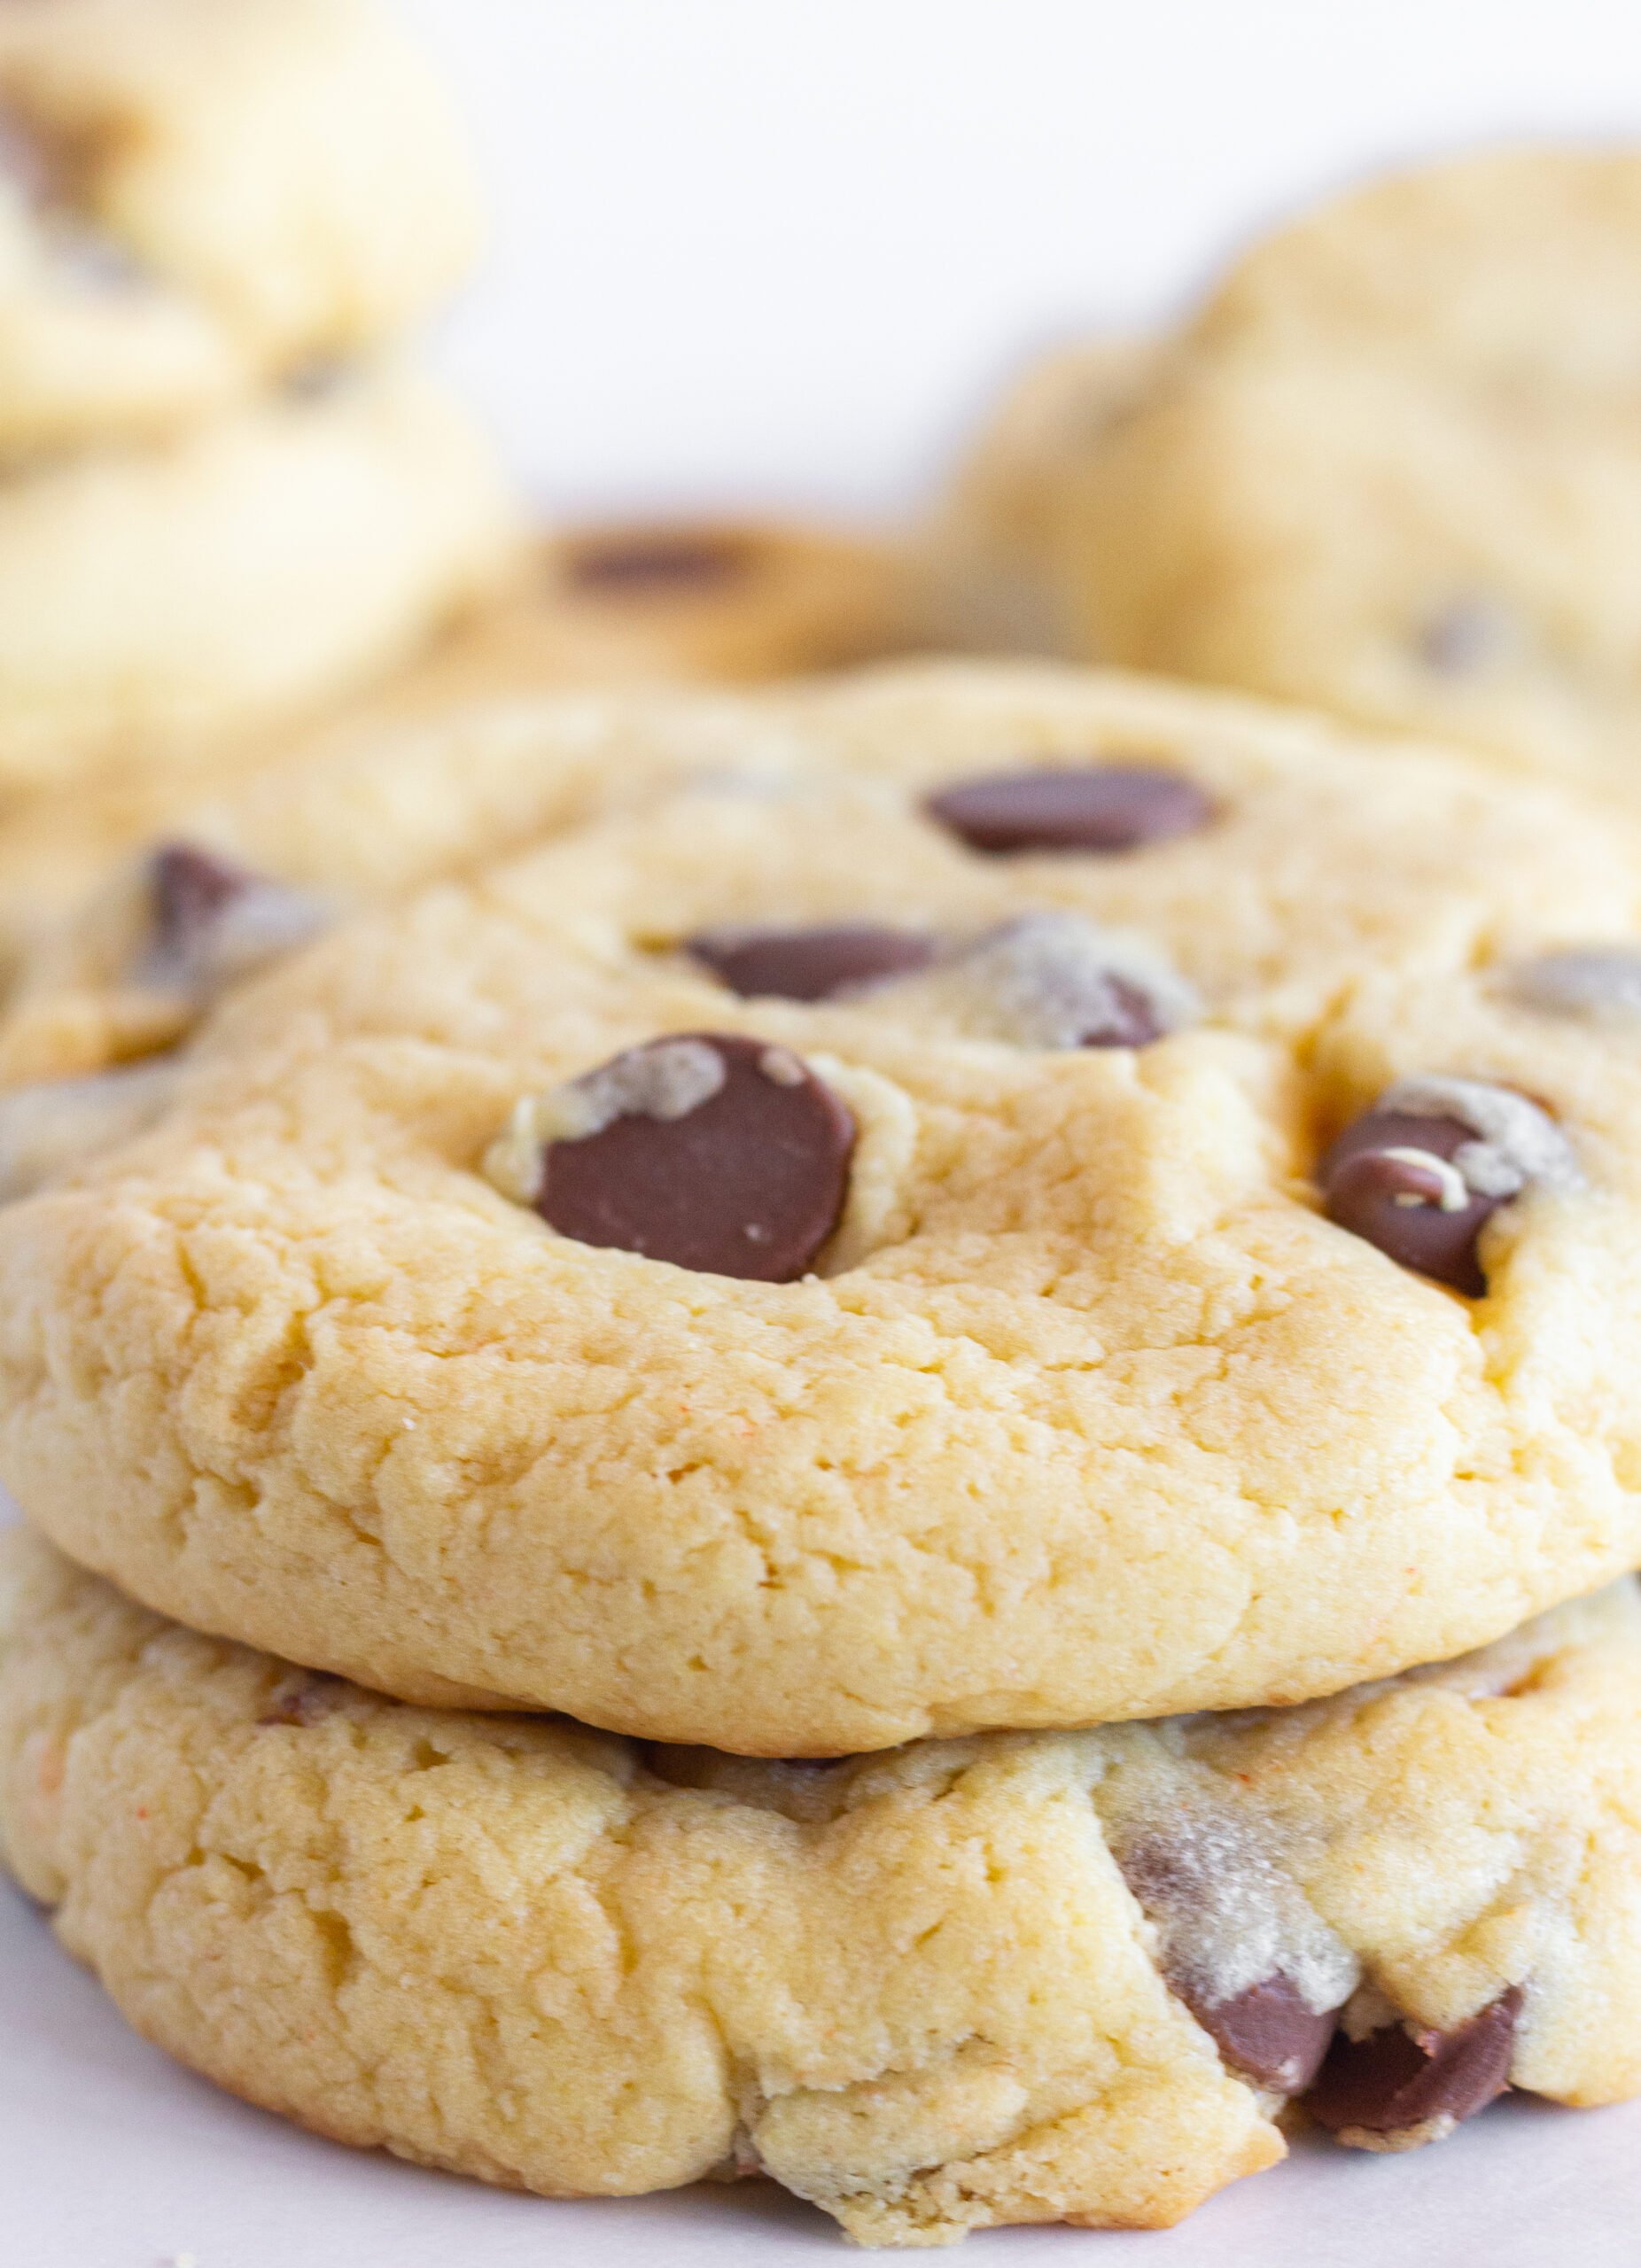 Easy Chocolate Chip Cake Mix Cookies, by Top US Cookie blog Practically Homemade